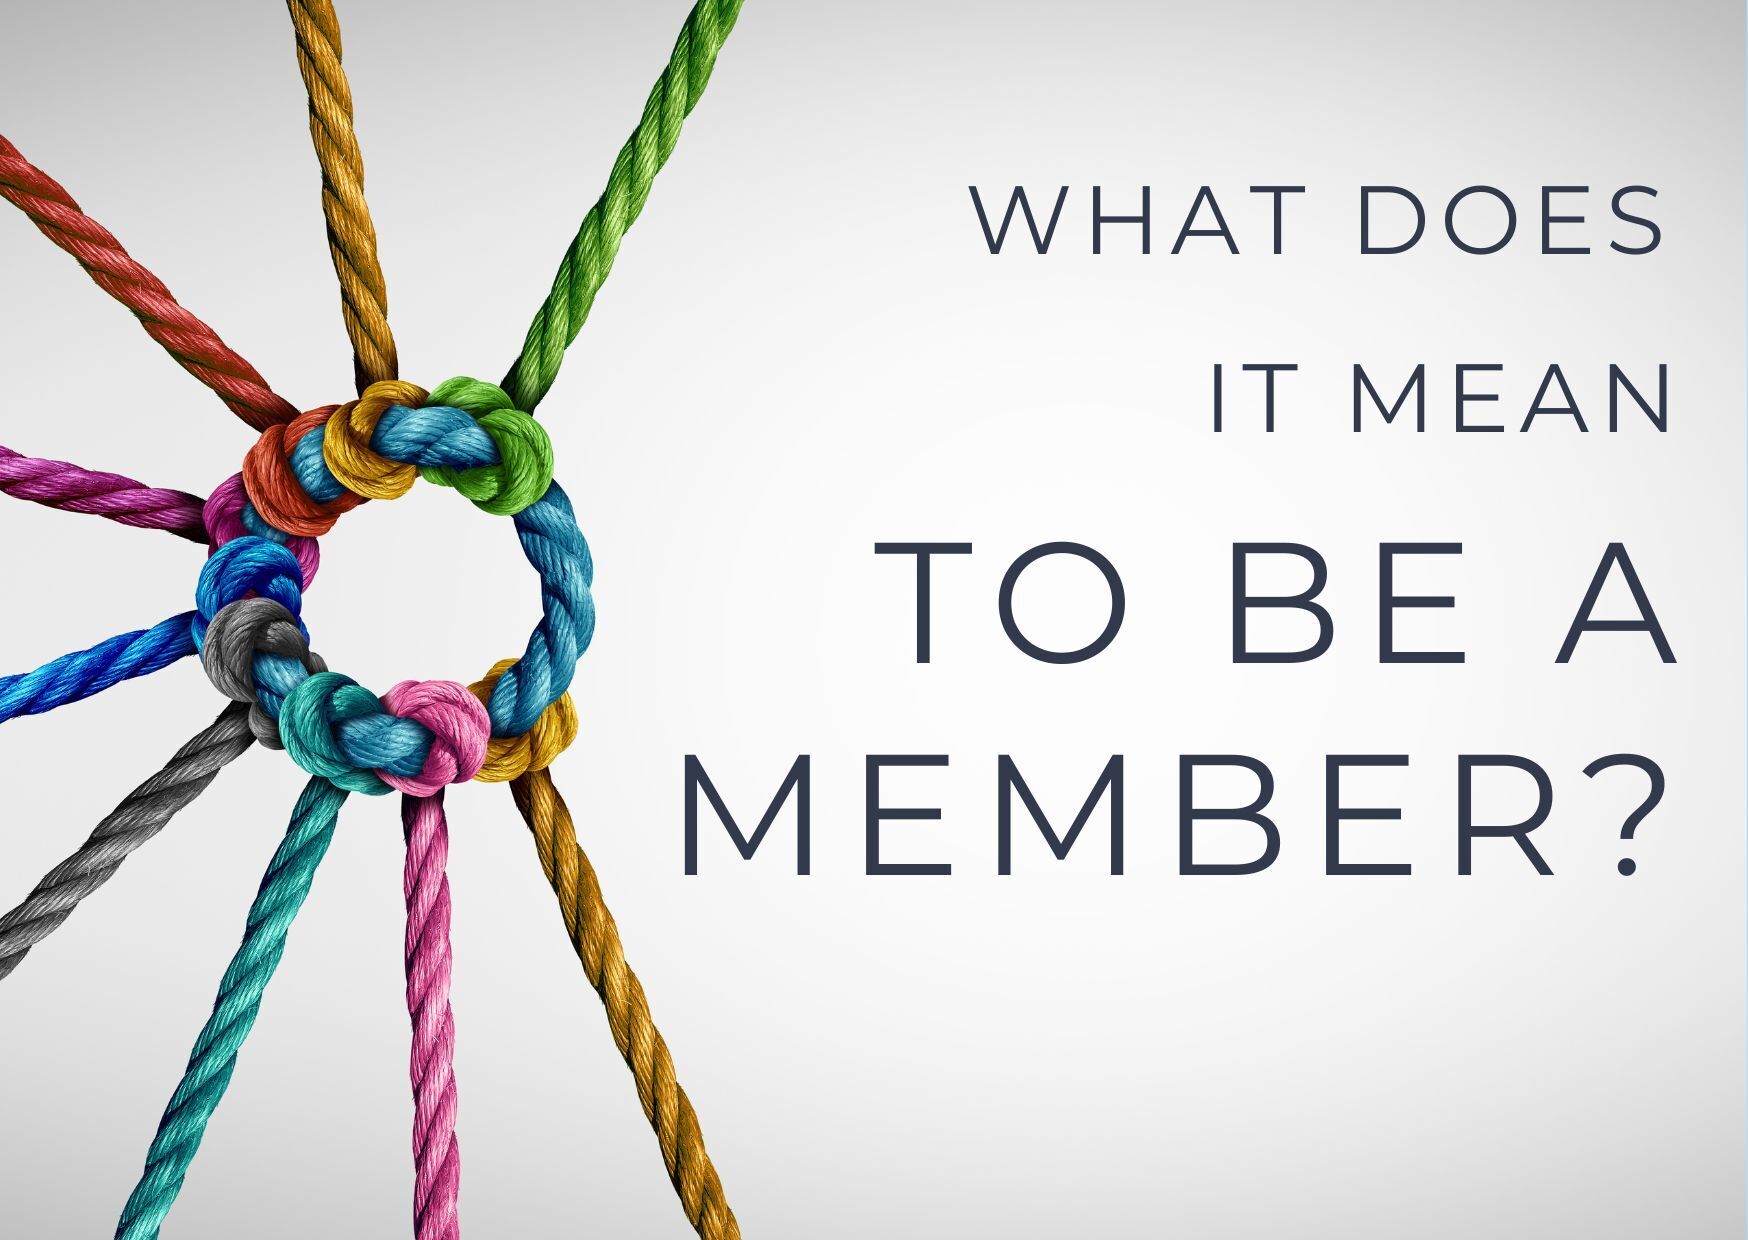 Becoming a Member